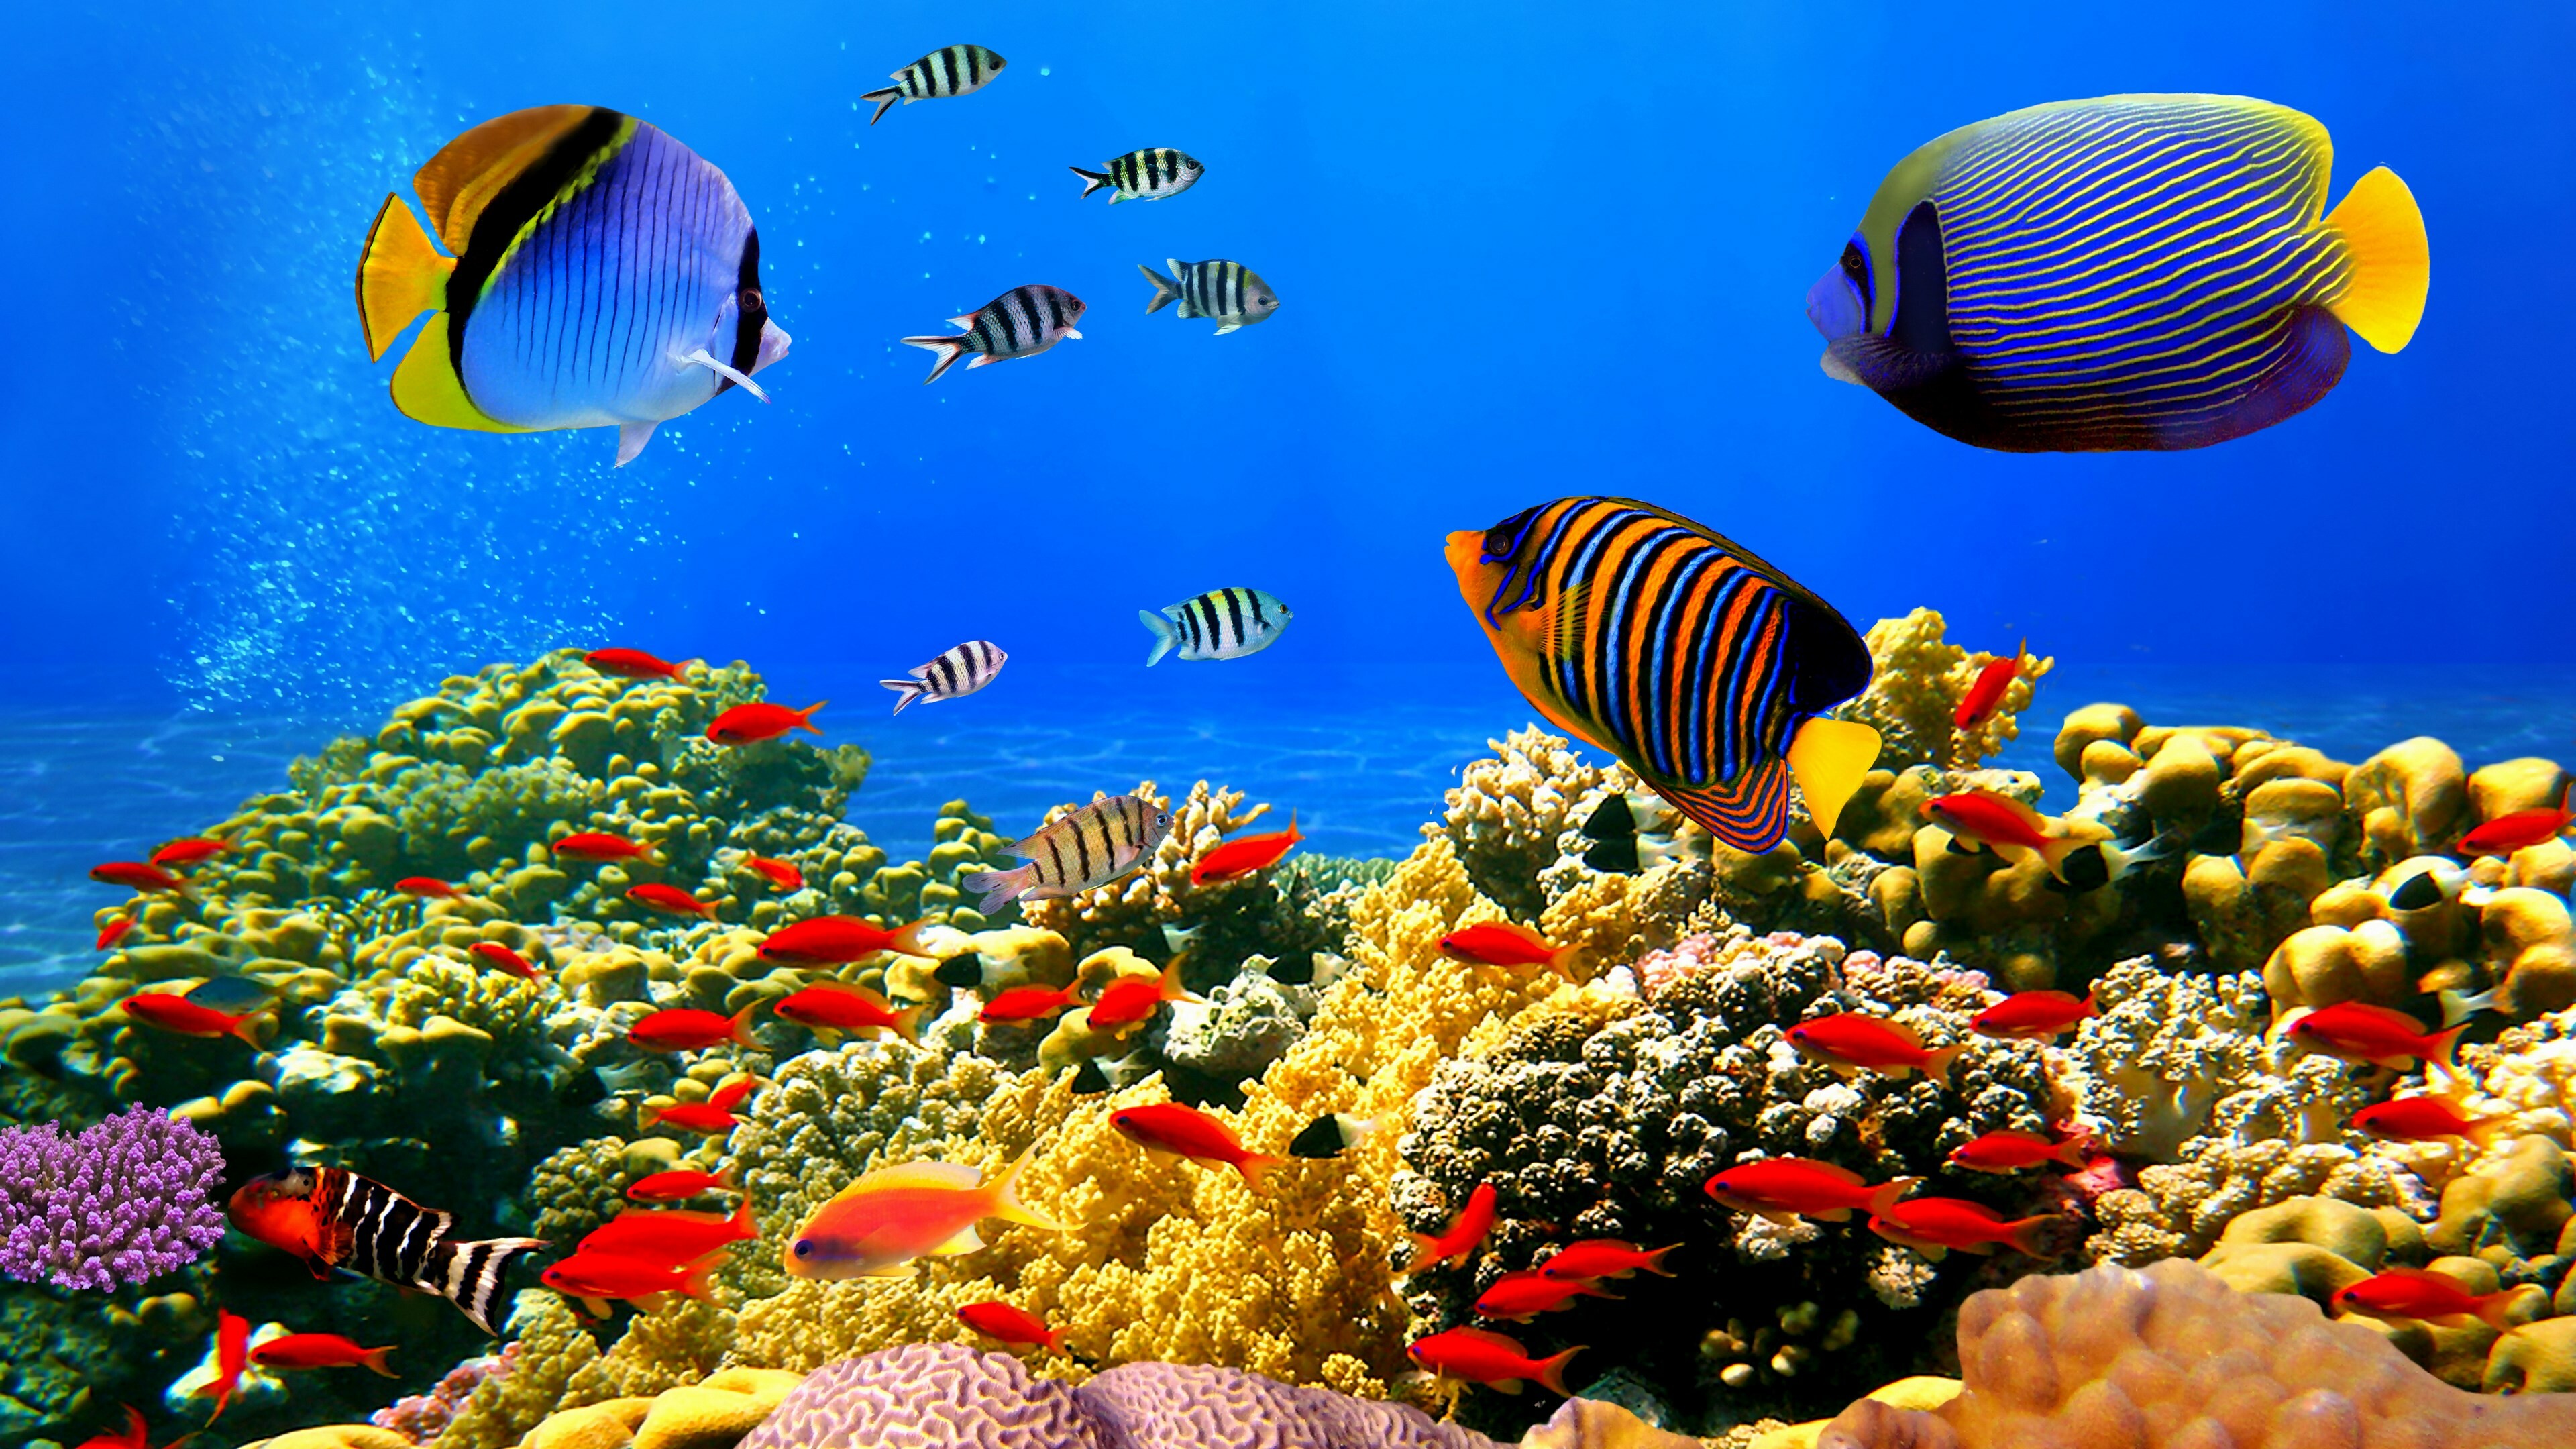 Coral Reef: Reefs are formed of colonies of polyps held together by calcium carbonate. 3840x2160 4K Wallpaper.